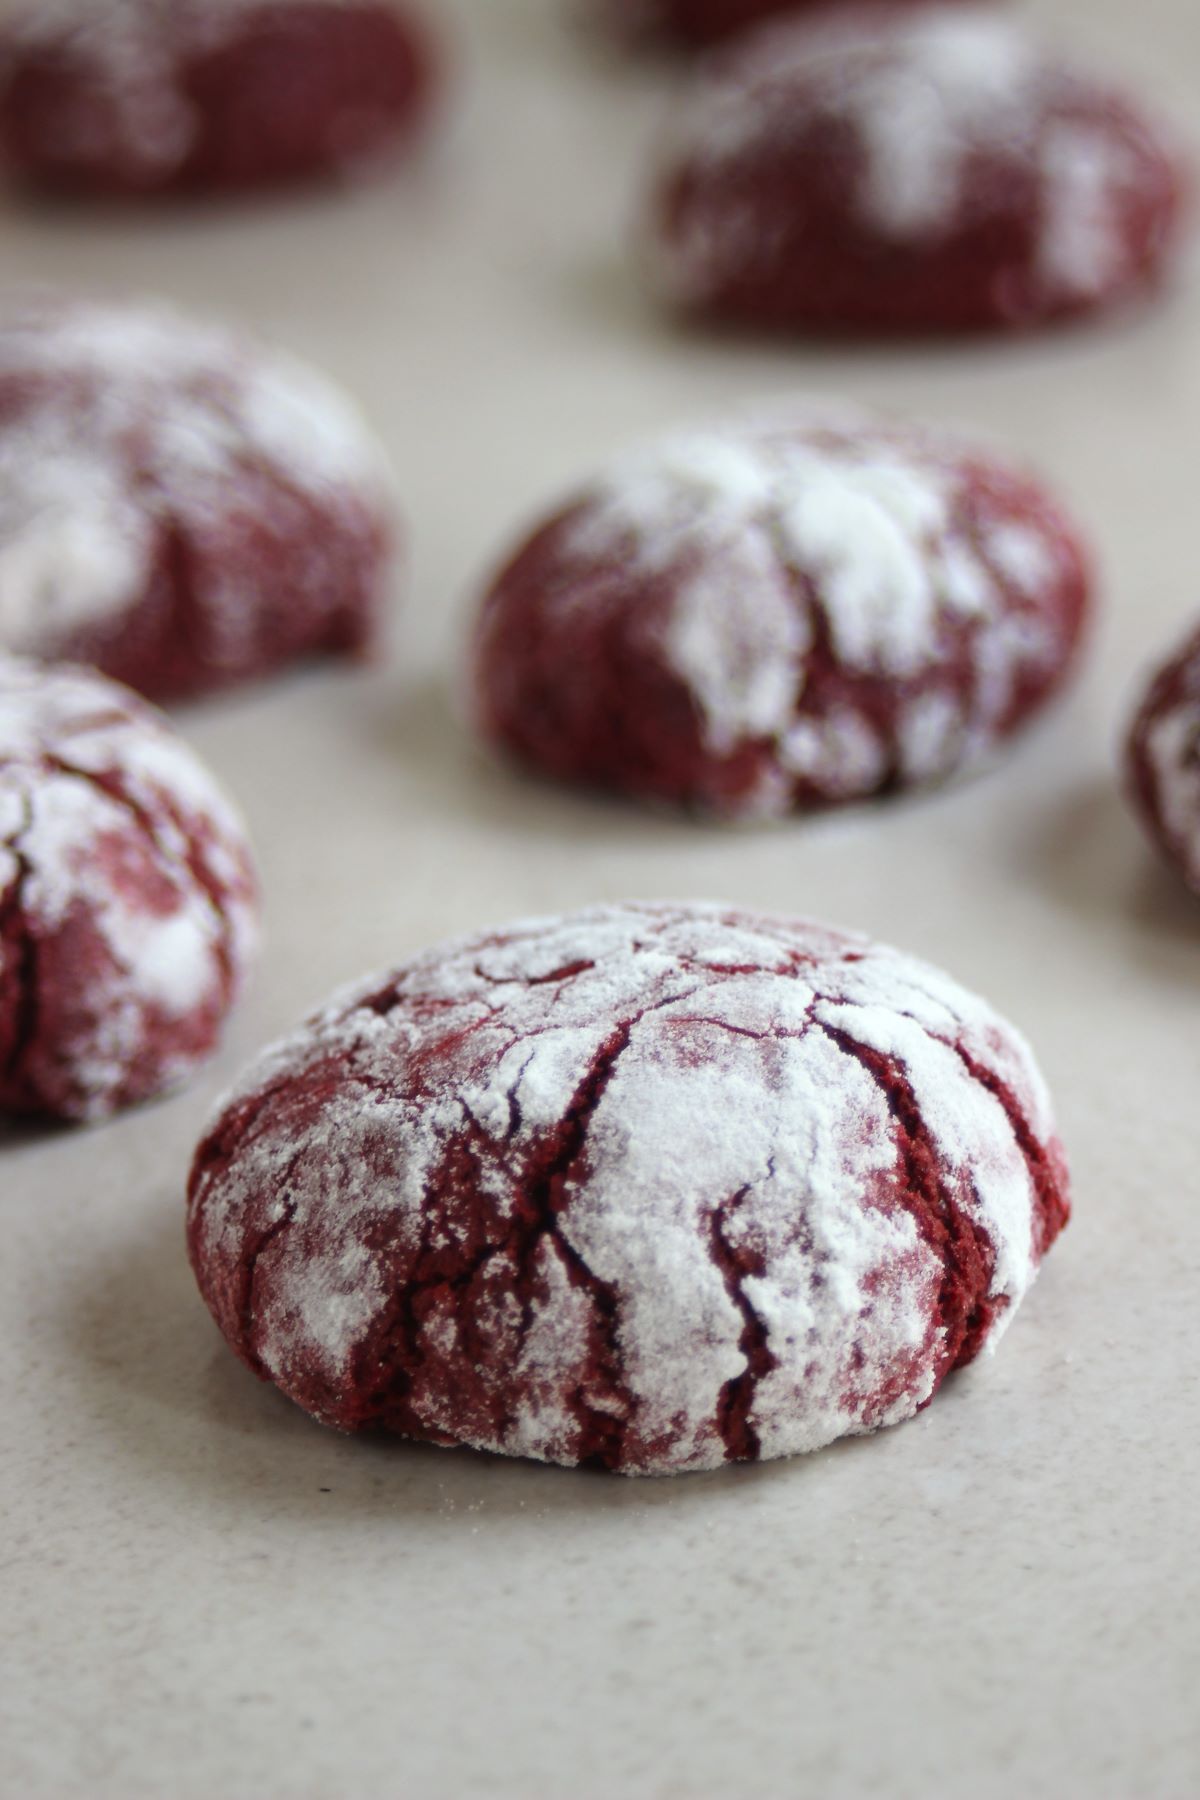 Red velvet crinkle cookies on a white surface.